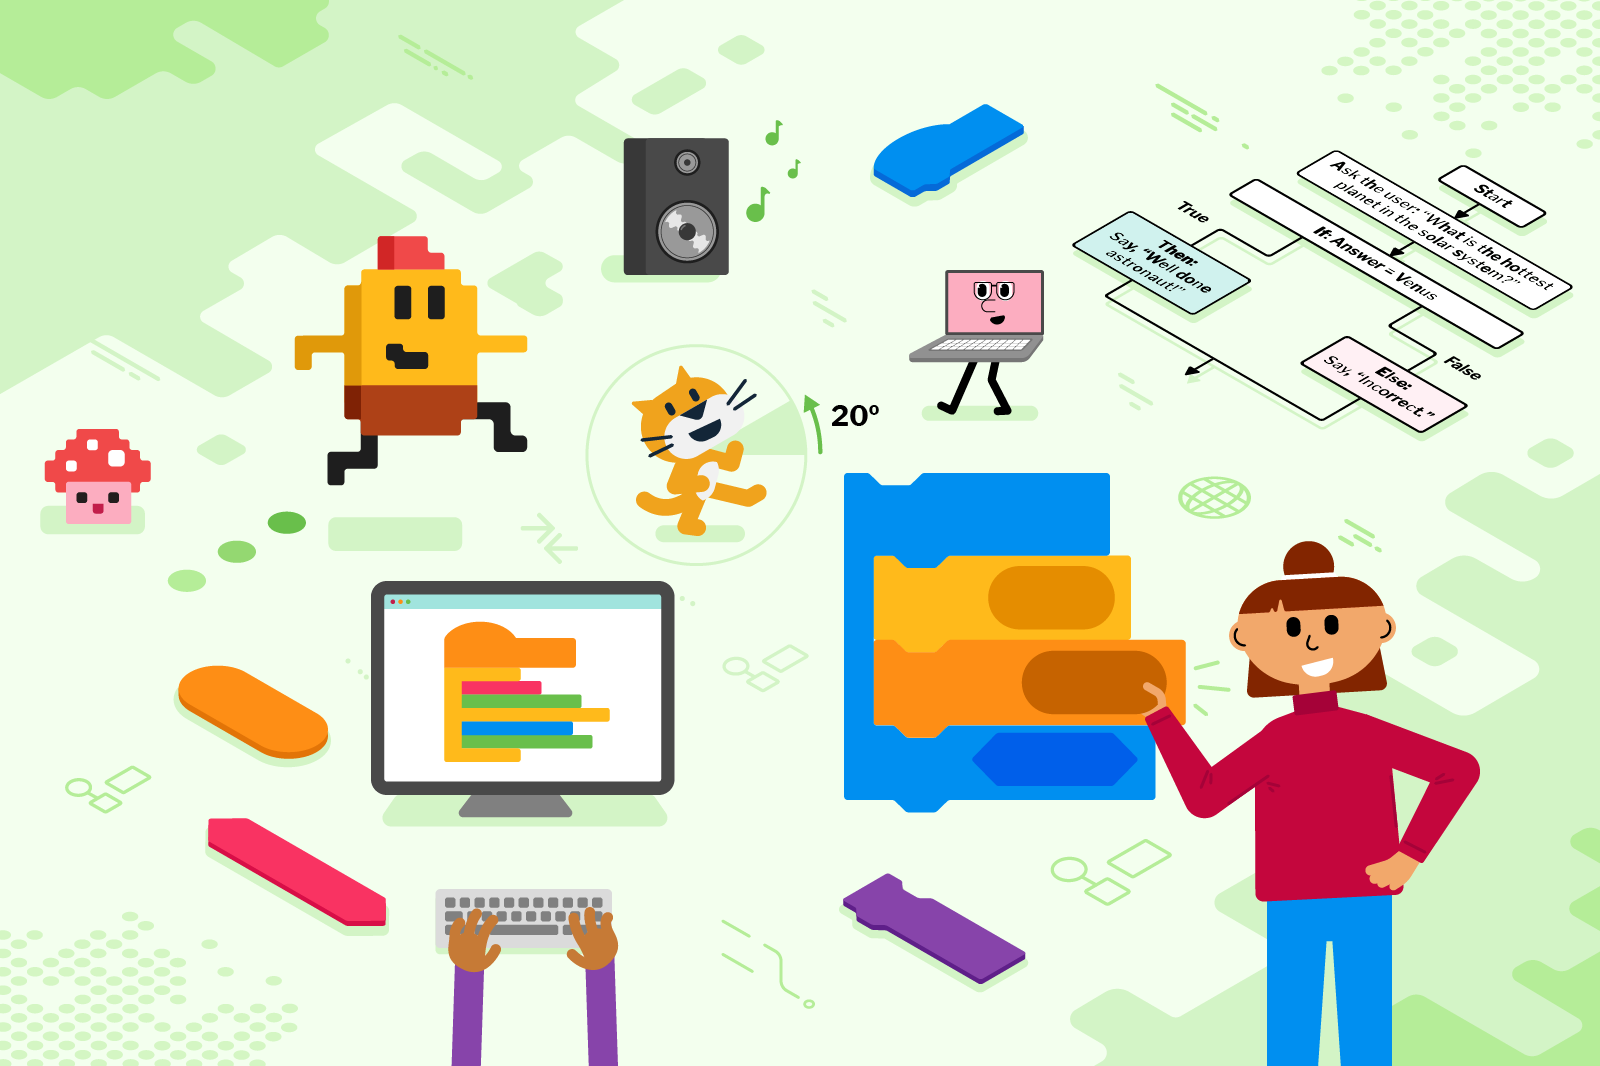 How to teach your children the basics of logic and programming for free  with Scratch